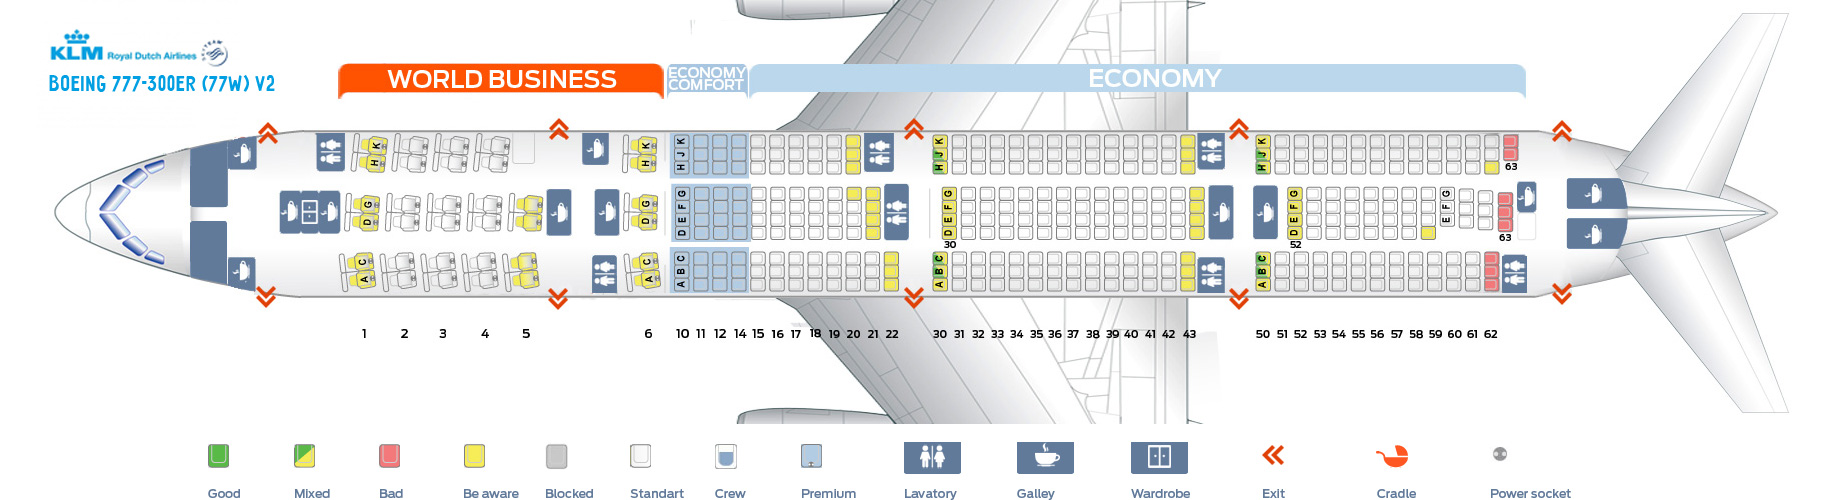 Boeing 777 300 Seat Map | Gadgets 2018